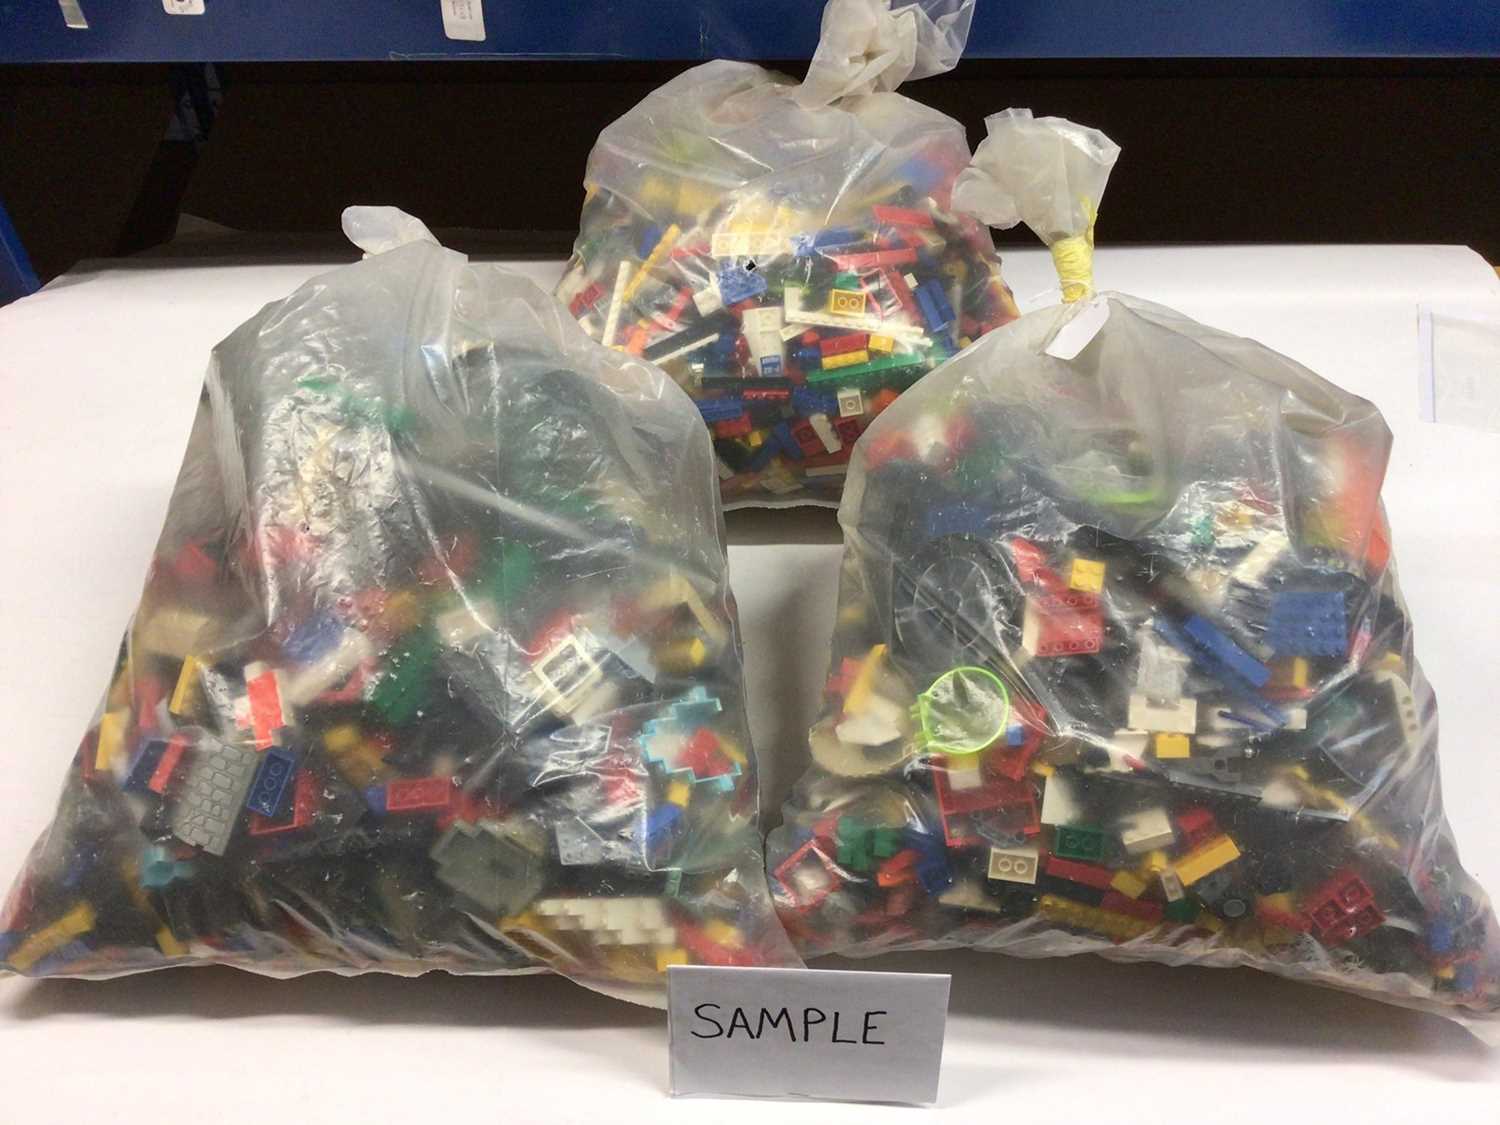 Lot 86 - Three bags of assorted mixed Lego bricks and accessories, weighing approx 15 Kg in total